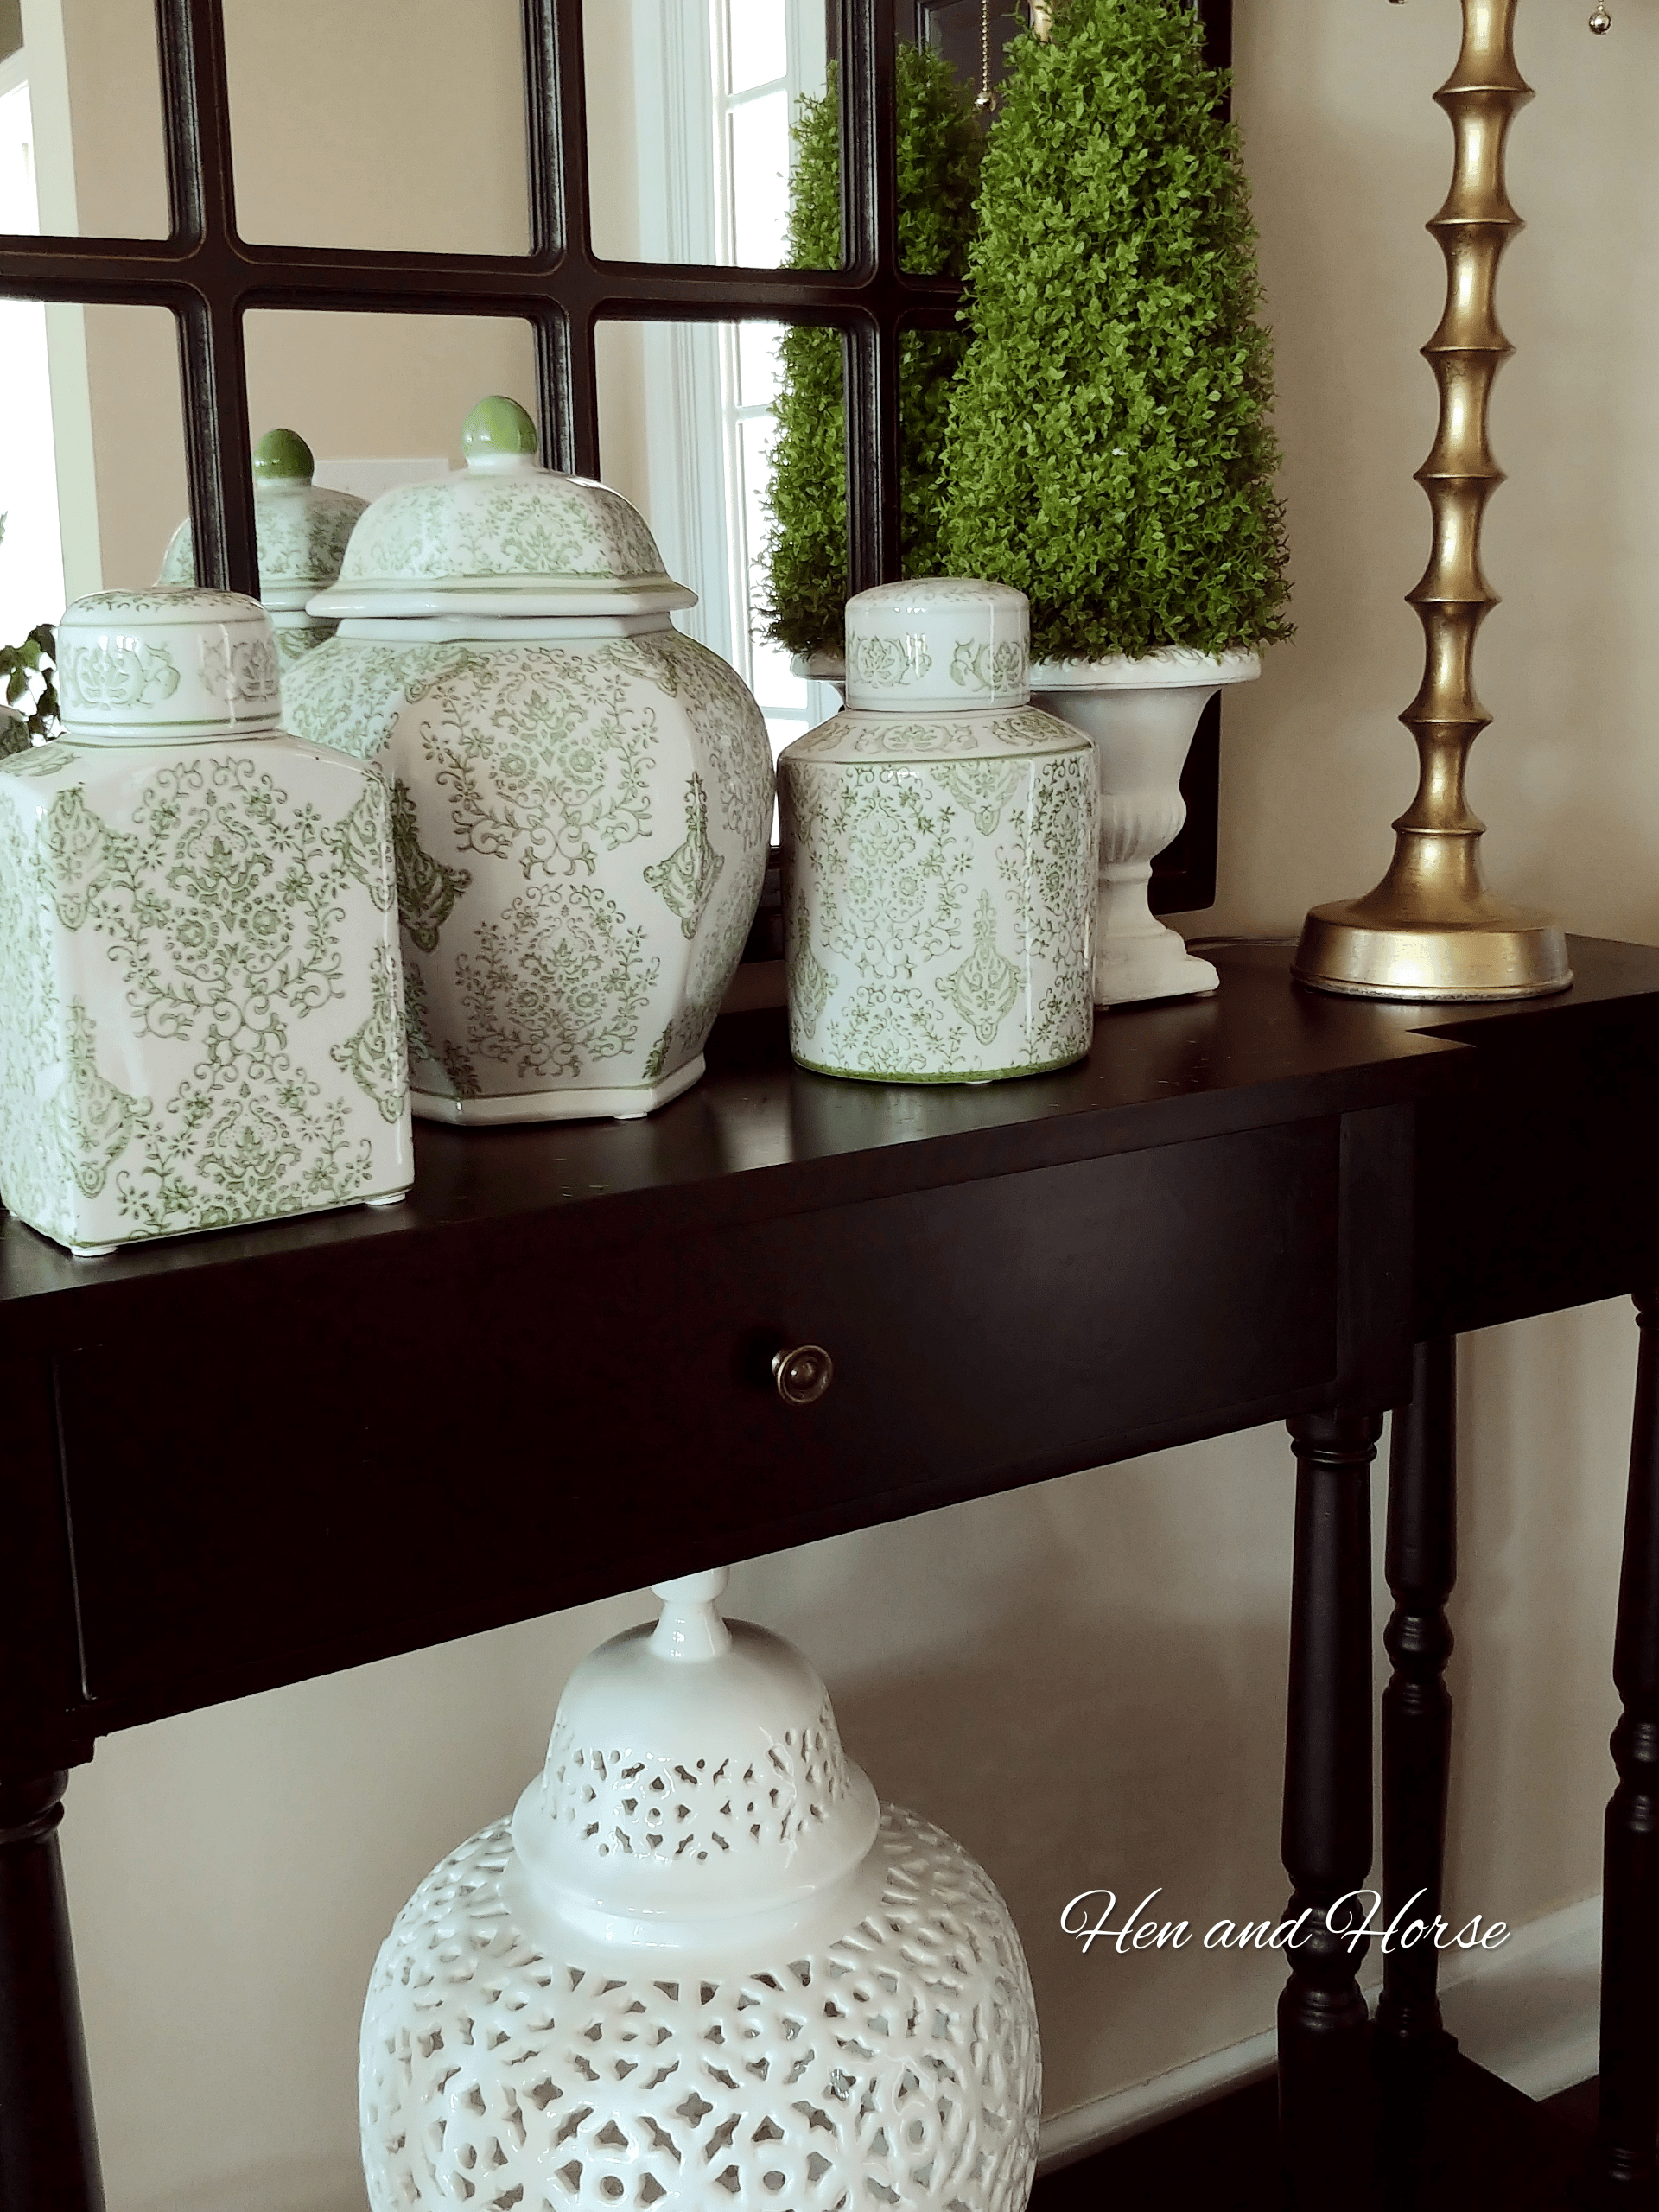 My Favorite Green and White Ginger Jars